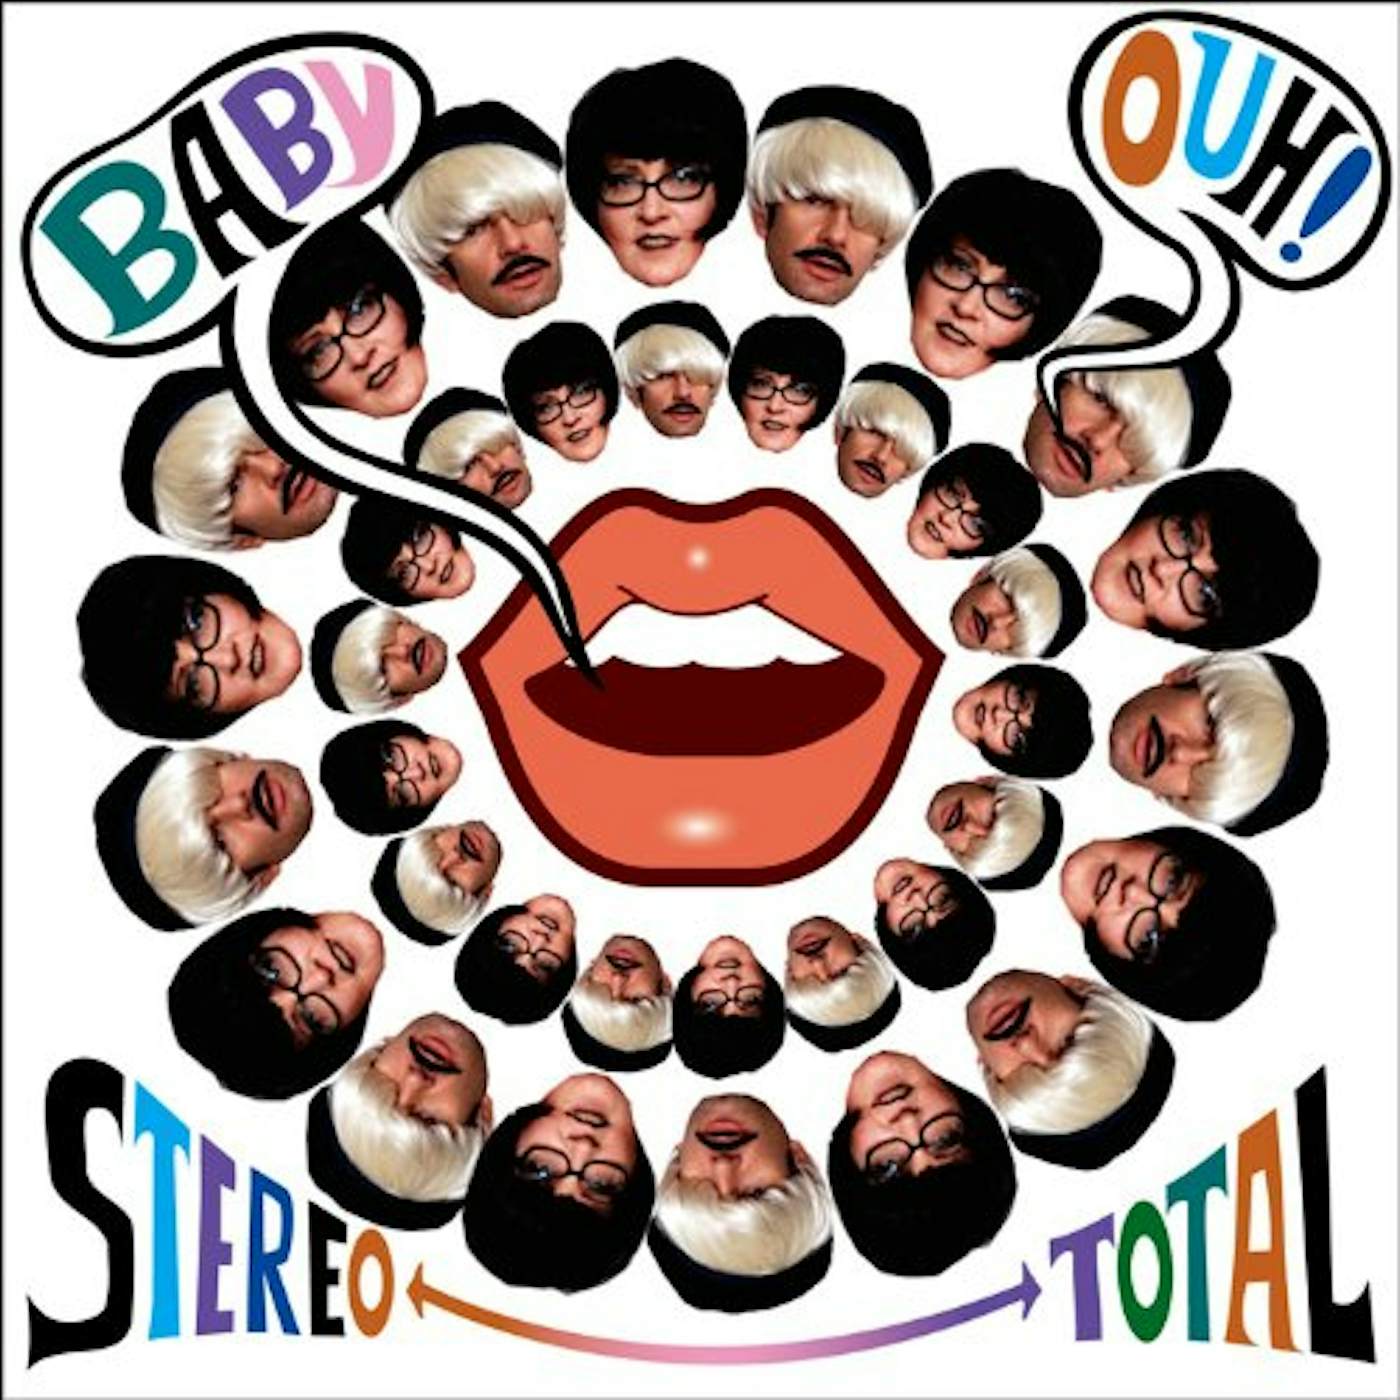 Stereo Total BABY OUH CD